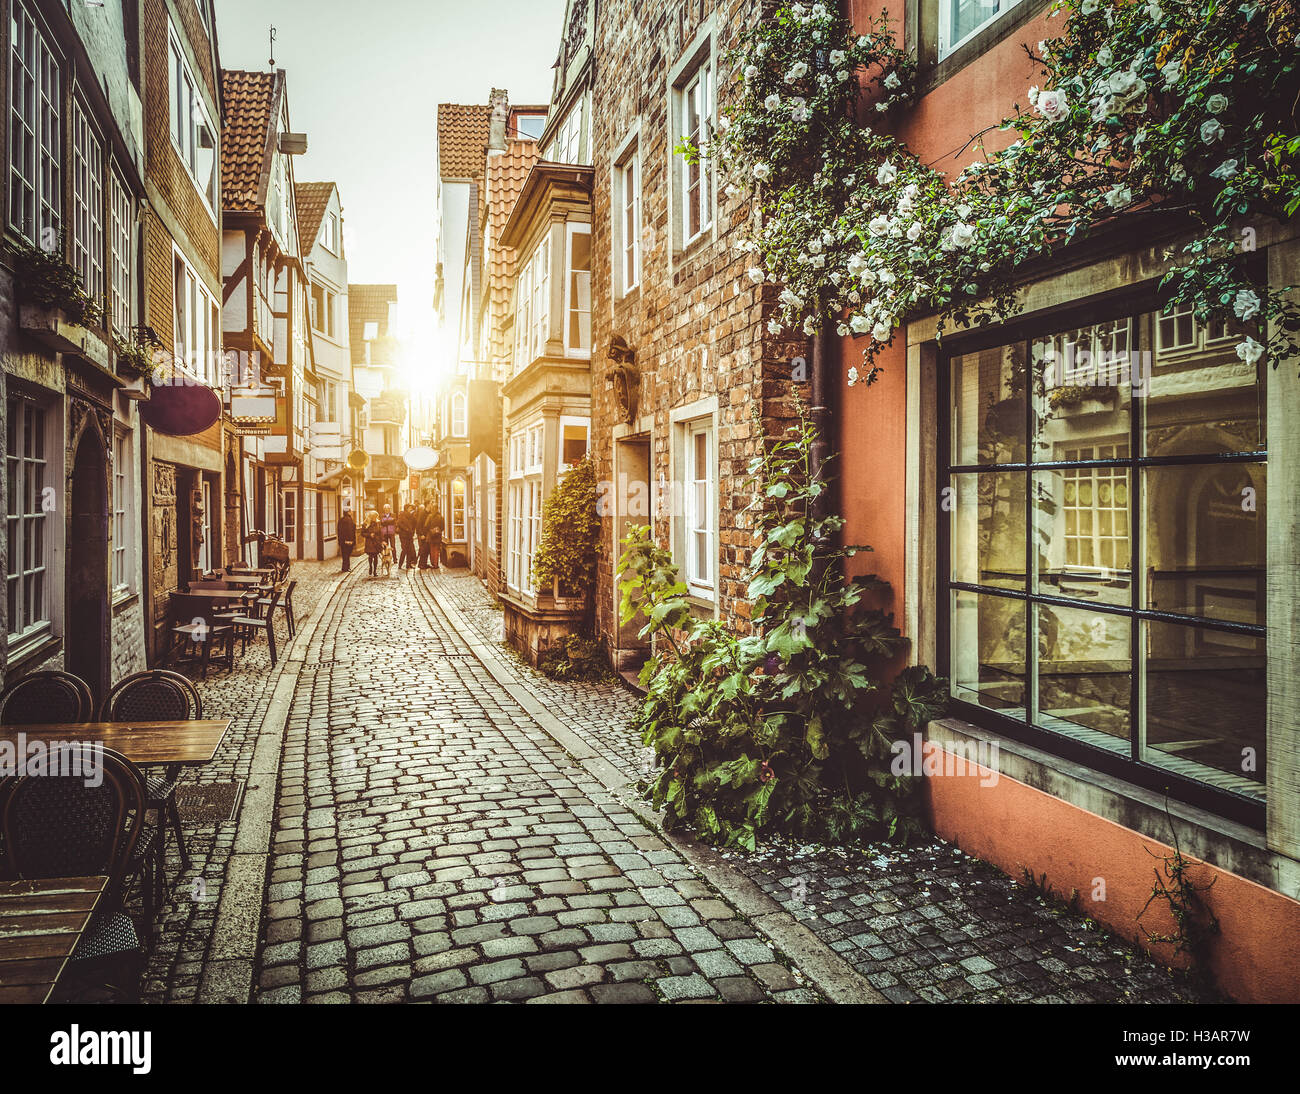 Old town in Europe at sunset with retro vintage Instagram style filter and lens flare sunlight effect Stock Photo